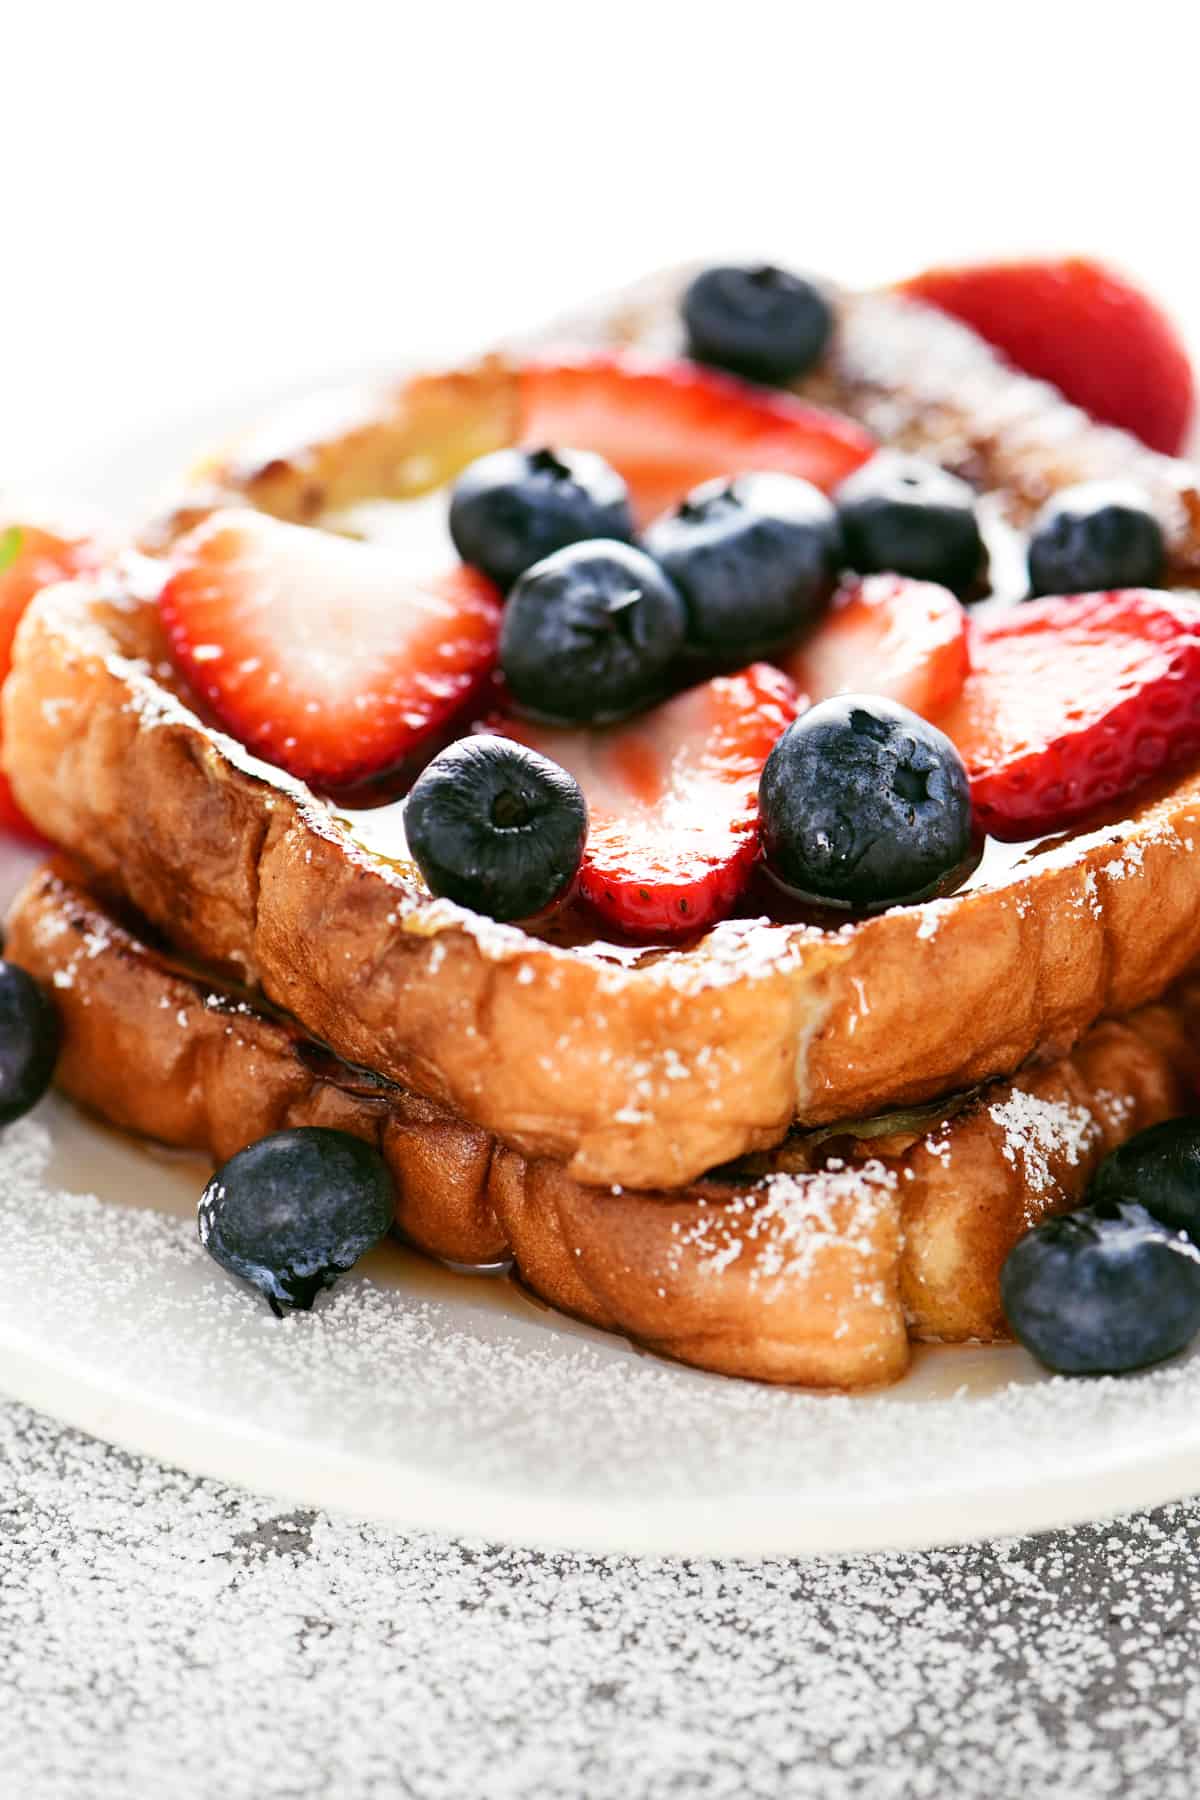 French Toast and berries.